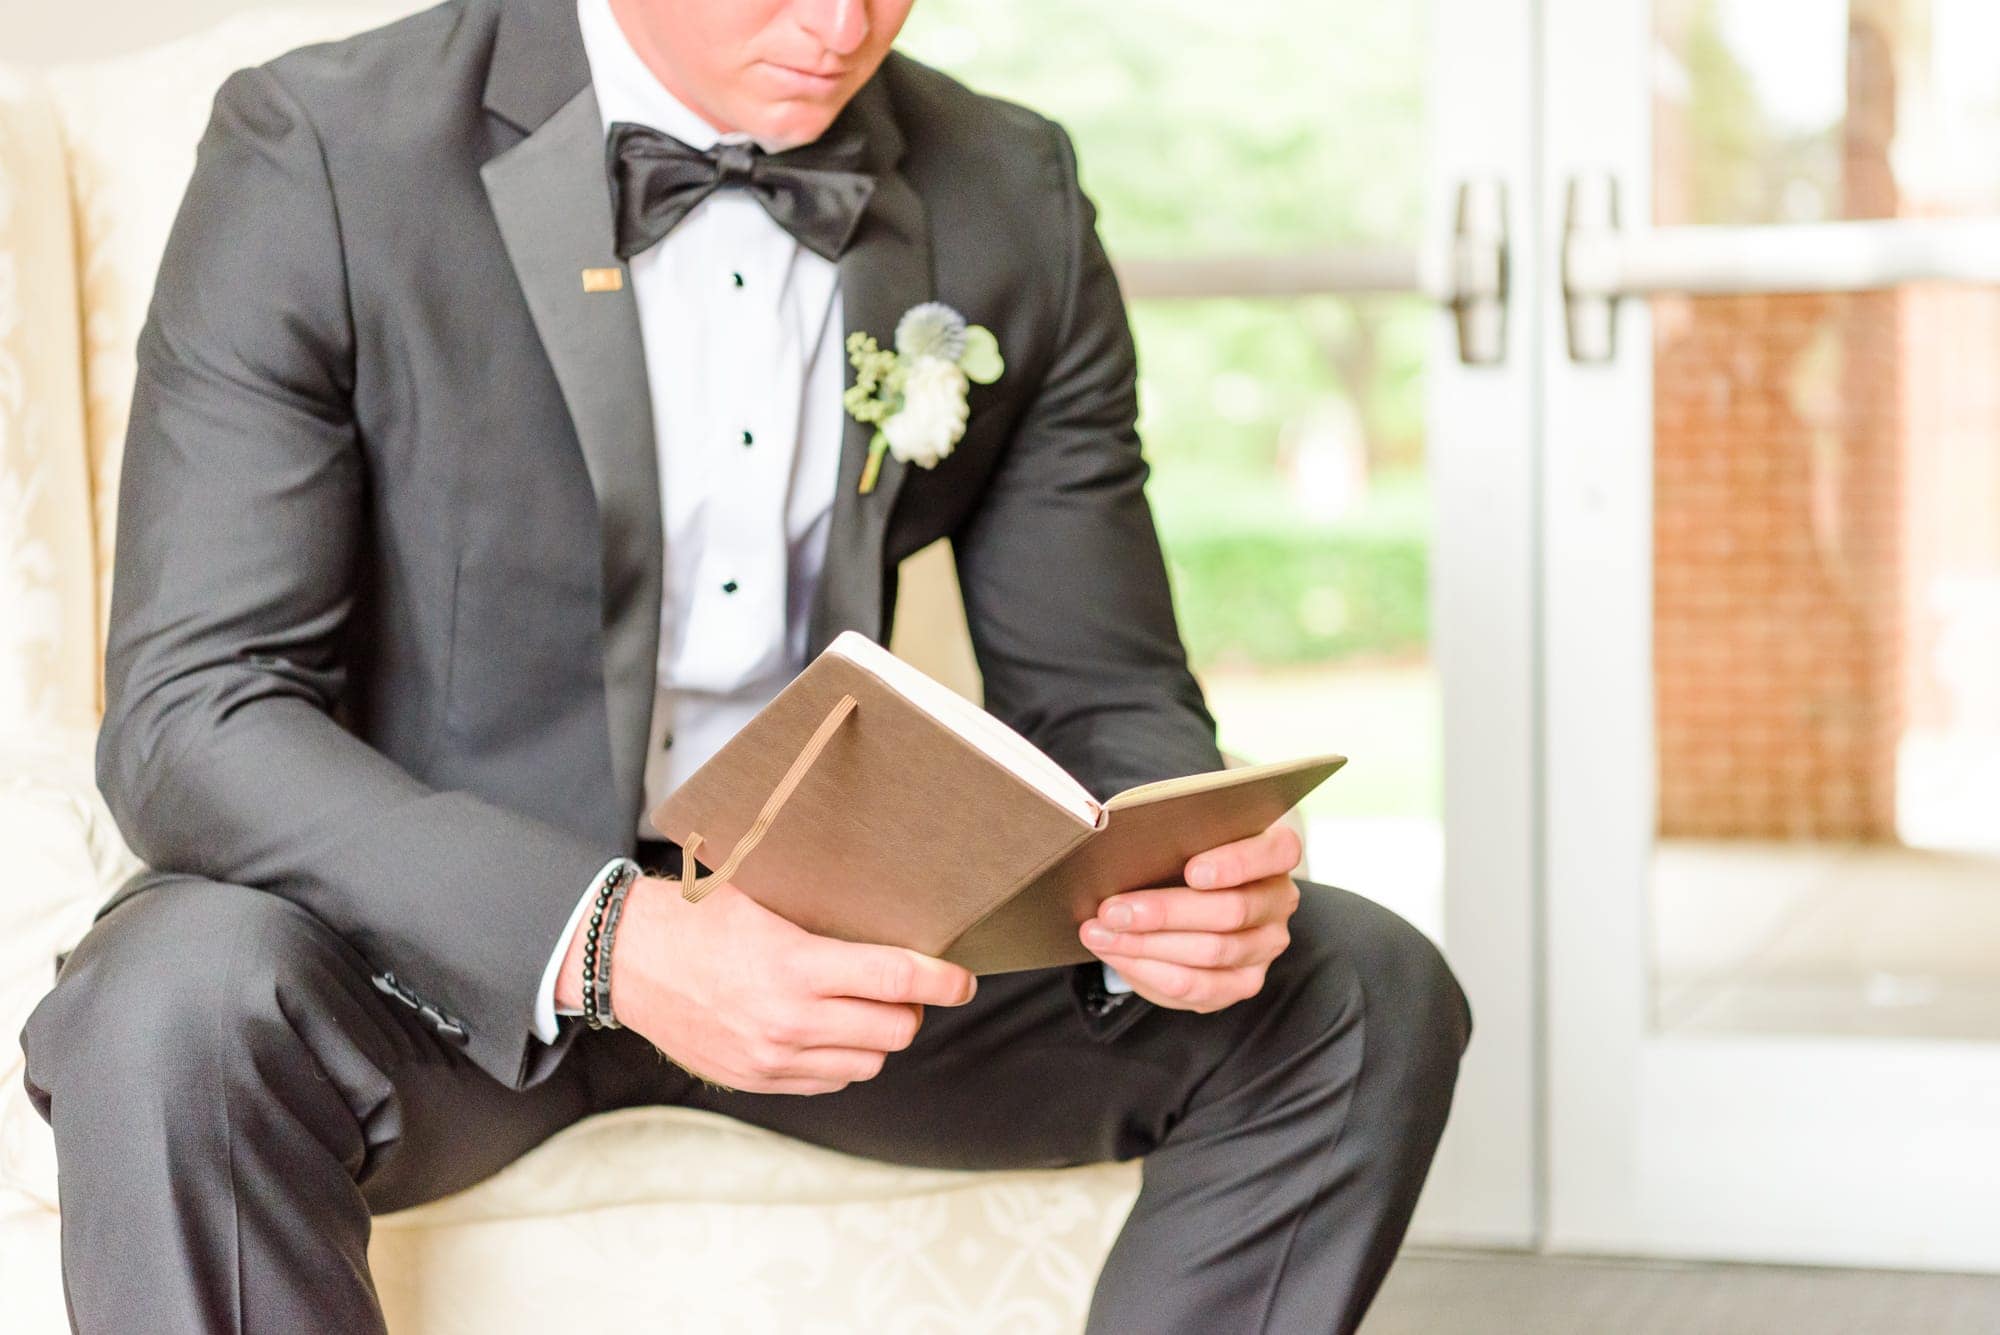 The most touching part of this Longview Country Club wedding in Charlotte was that the bride gave the groom a love note to read before the ceremony.